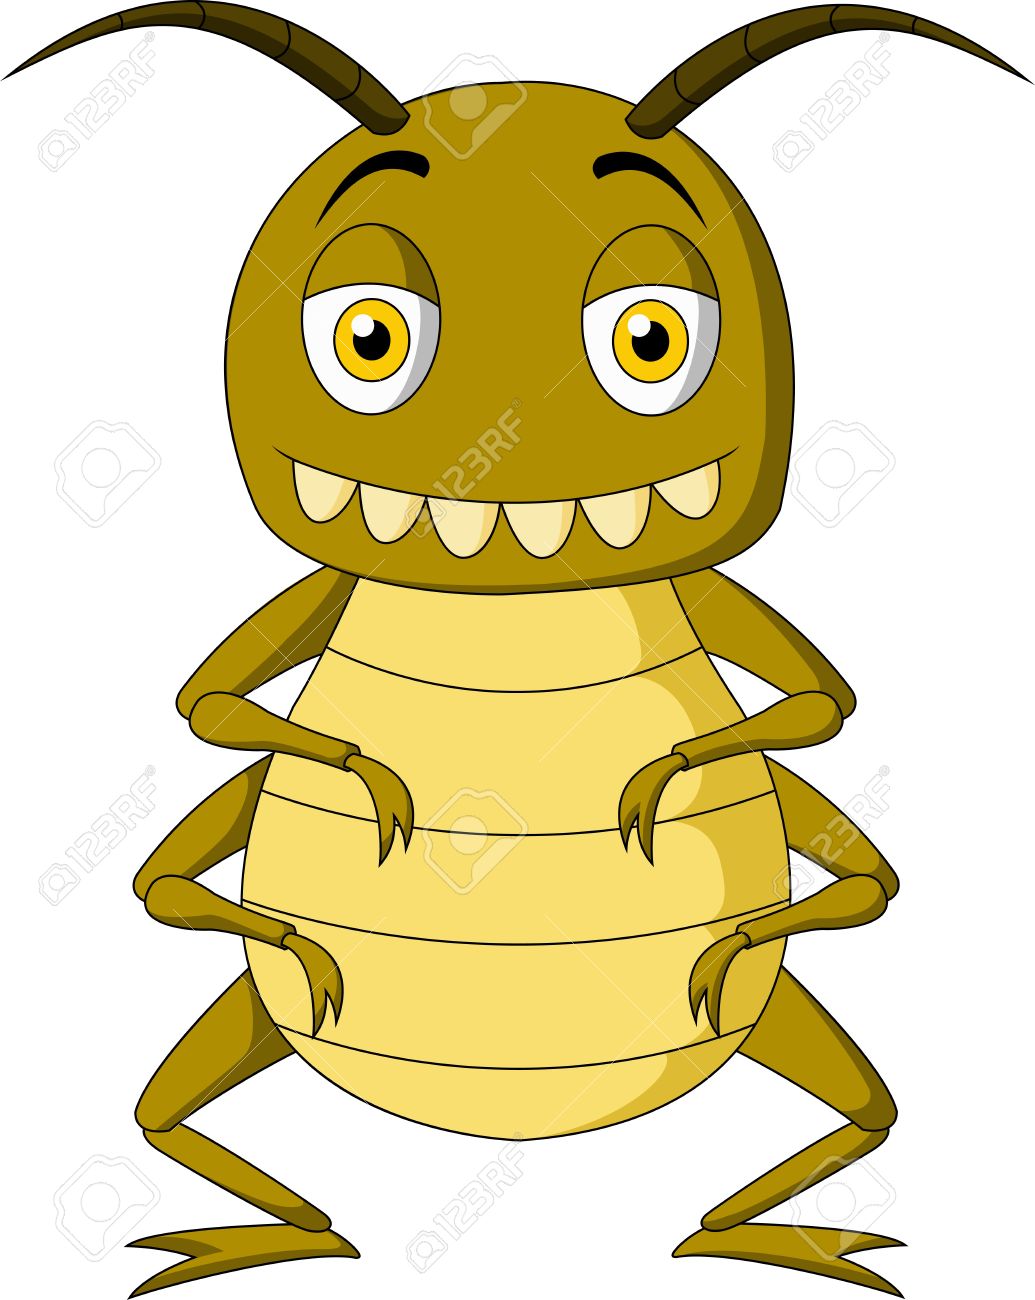 animated insects clipart - photo #37